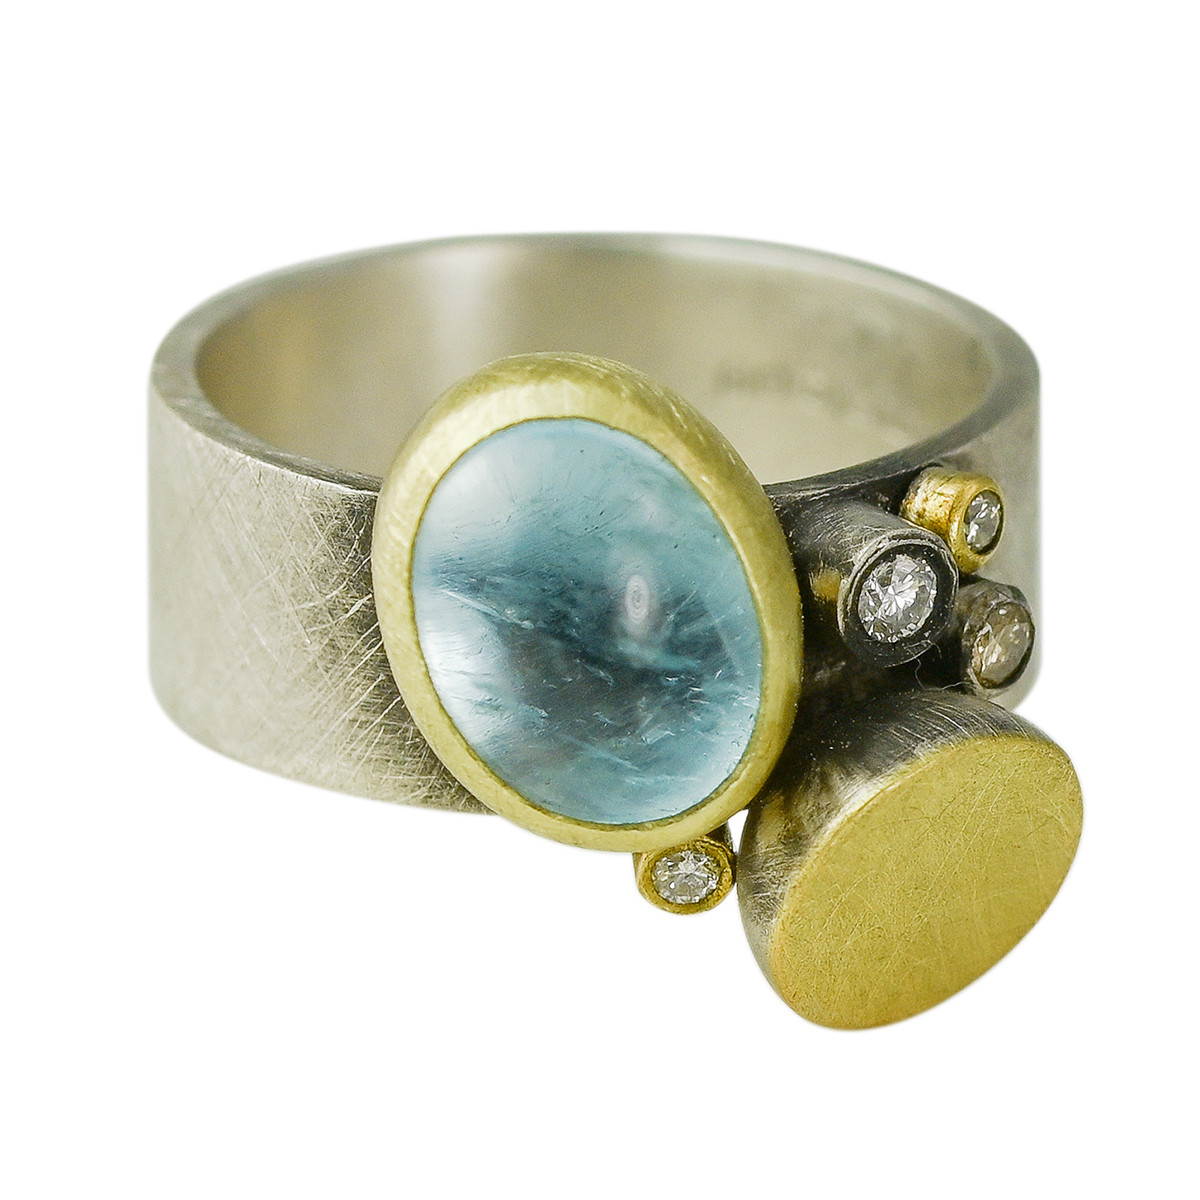 The Summer Art Ring by Daphne Krinos available at tomfoolery London as a part of Art Ring 2022 exhibition.